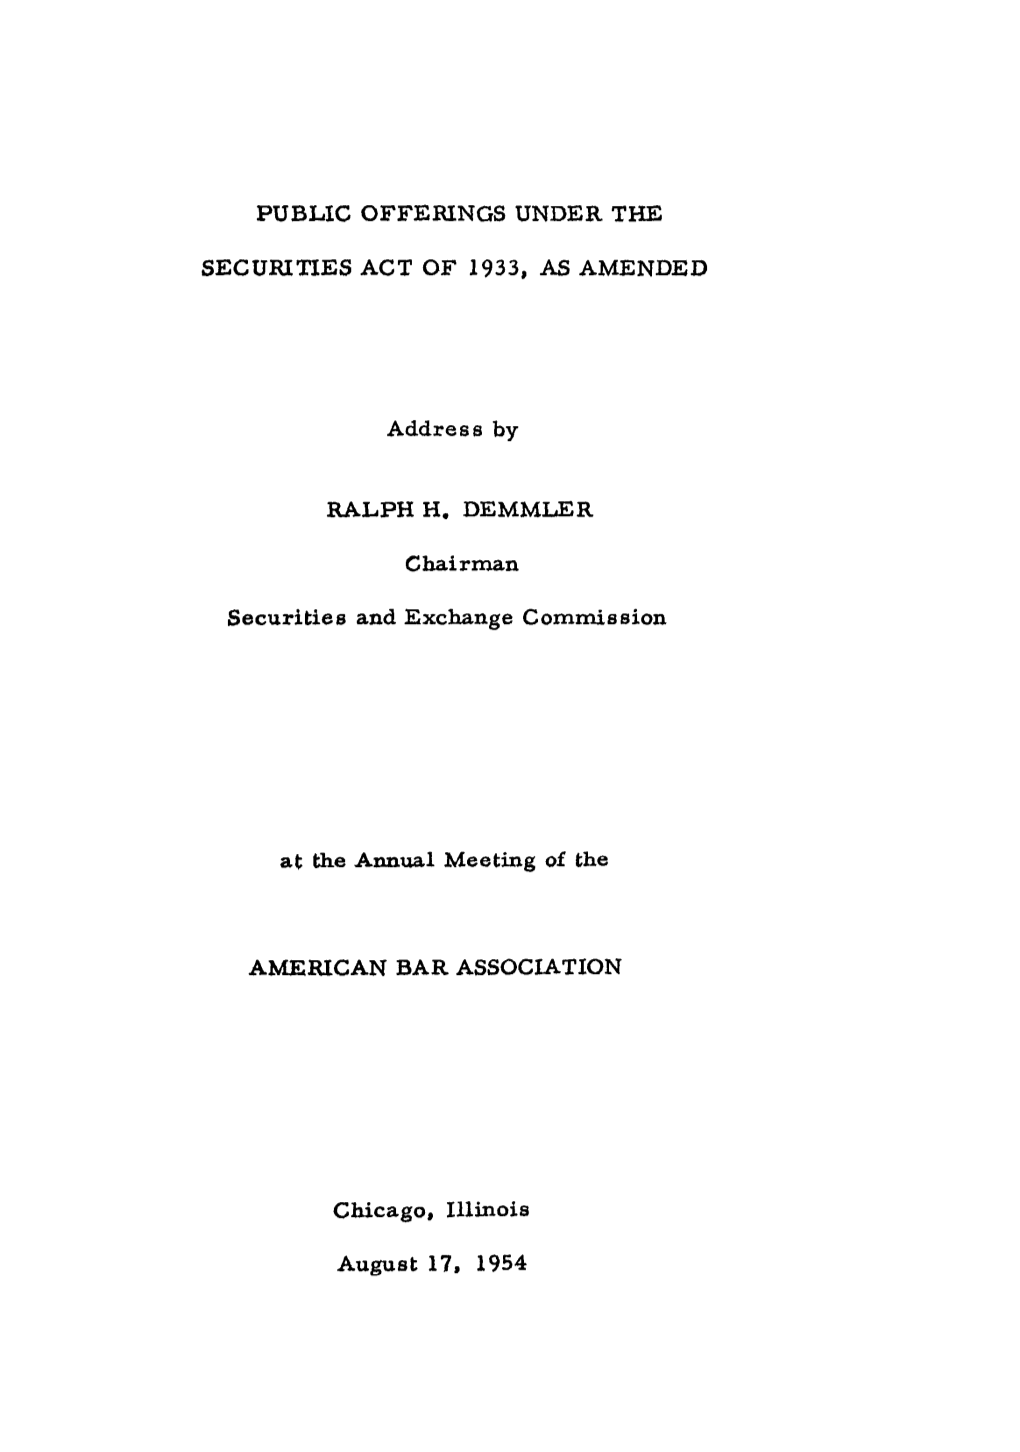 Public Offerings Under the Securities Act of 1933, As Amended